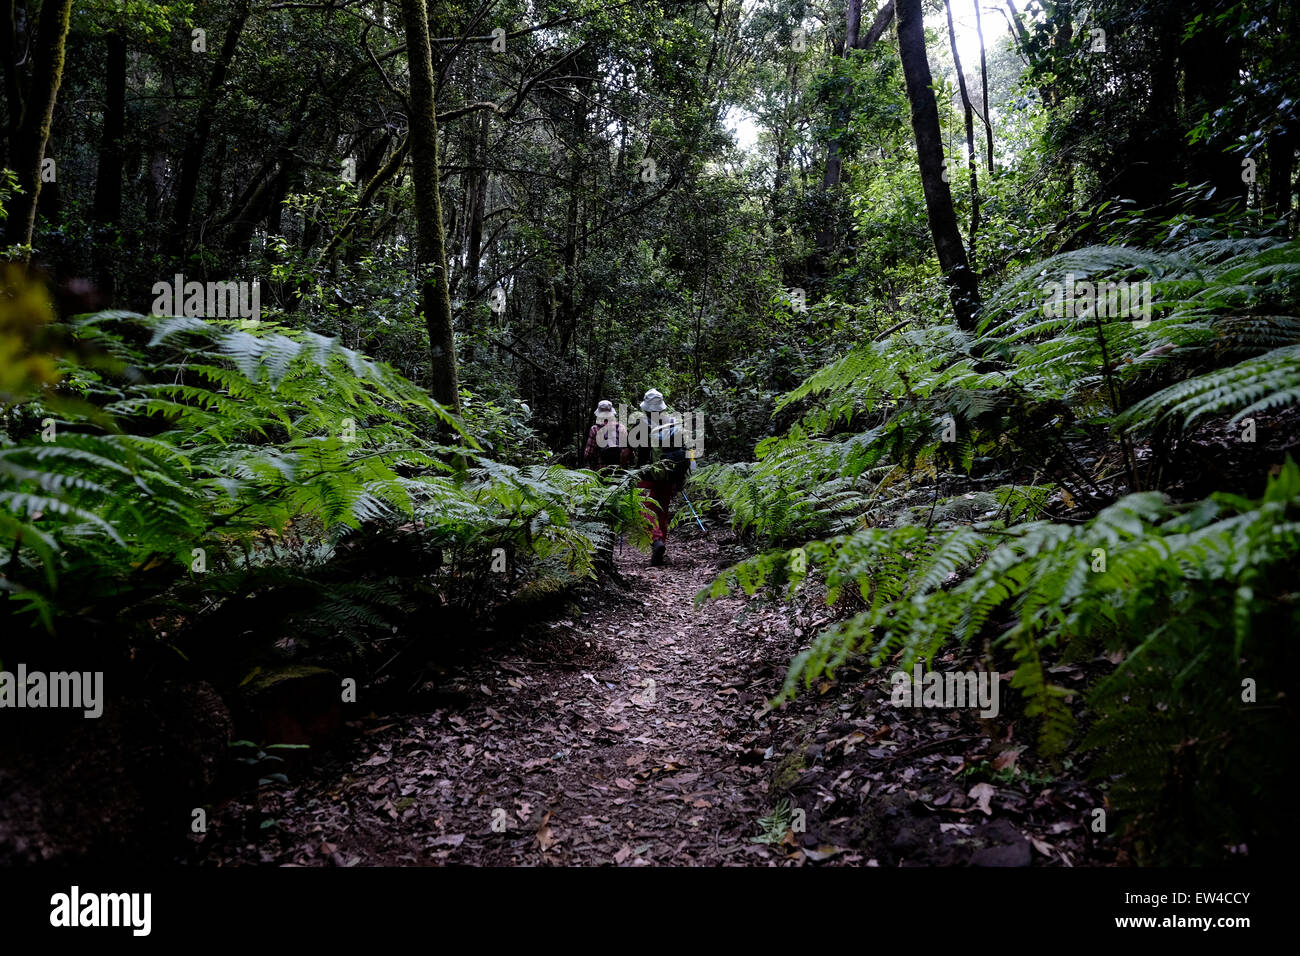 Hikers at the sub-tropical laurel greenery of El Cedro forest in the National Park of Garajonay a Unesco Heritage site in the central part of La Gomera island, one of the smaller Canary Islands an autonomous community of Spain Stock Photo